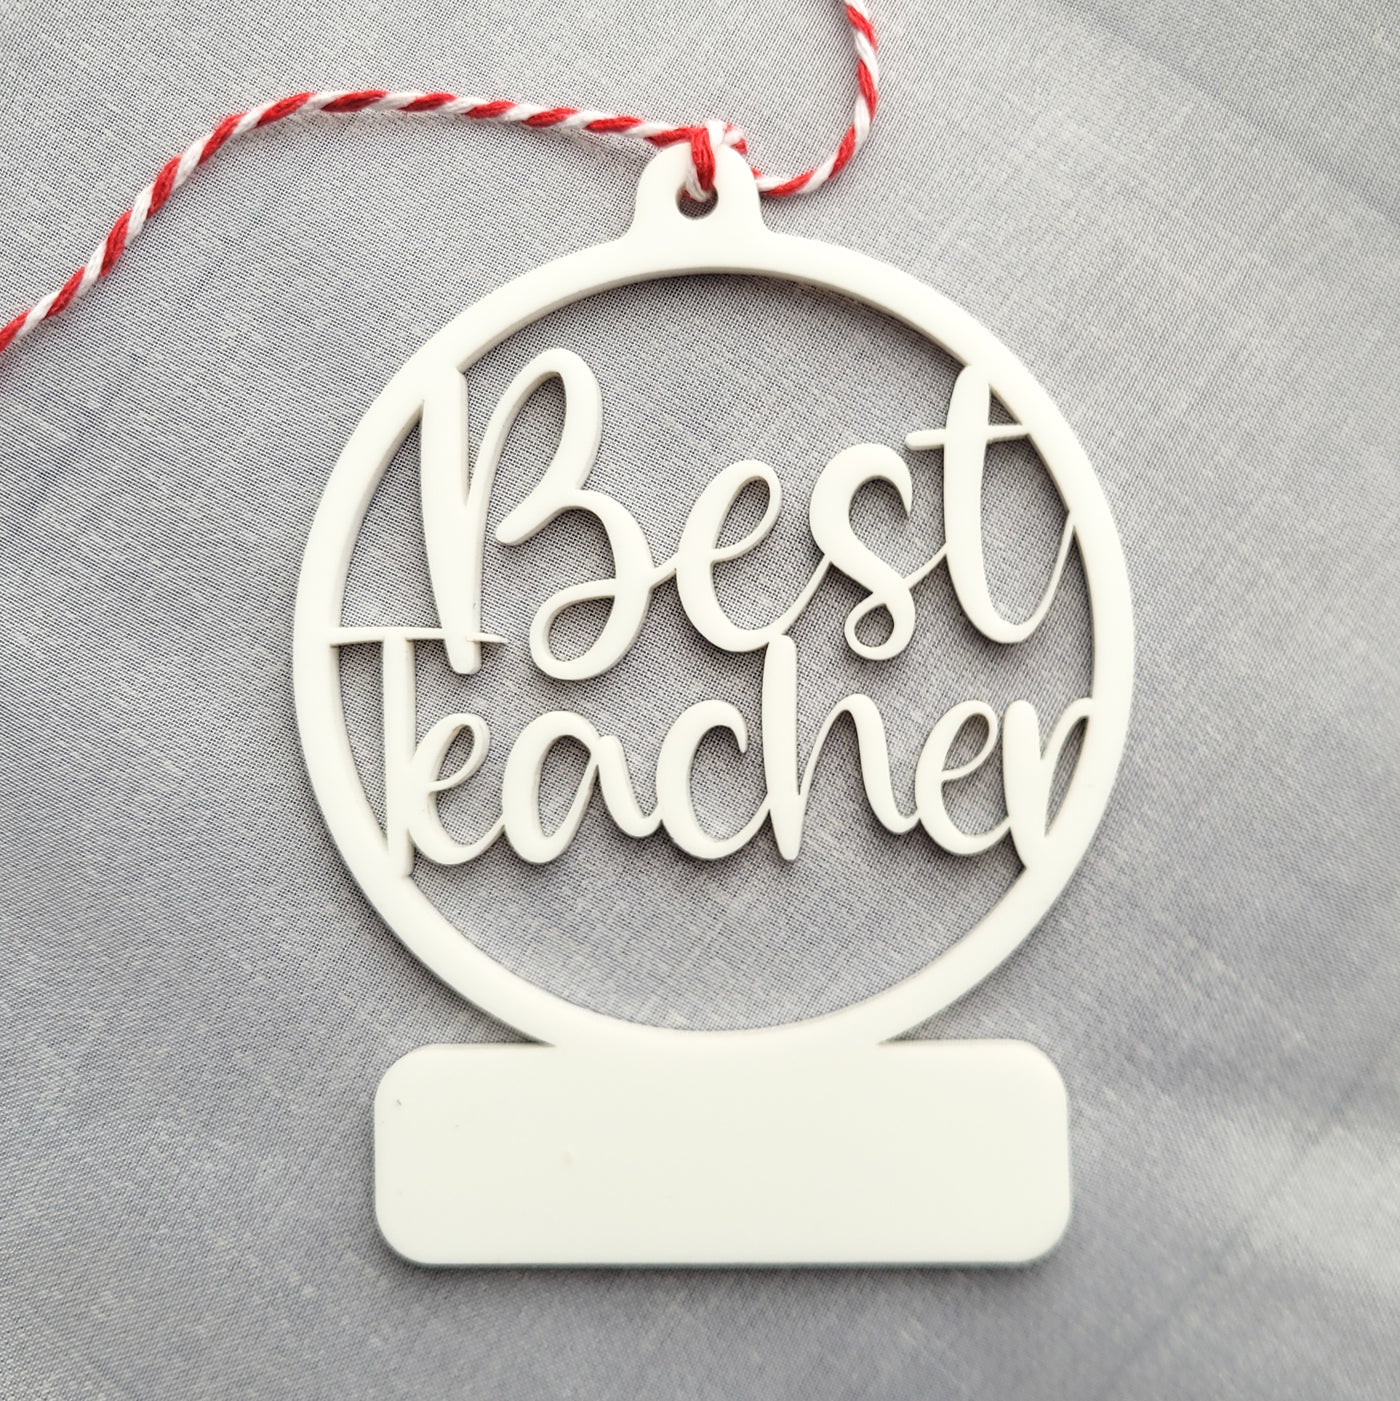 Best Teacher Ornament - With personalisation space